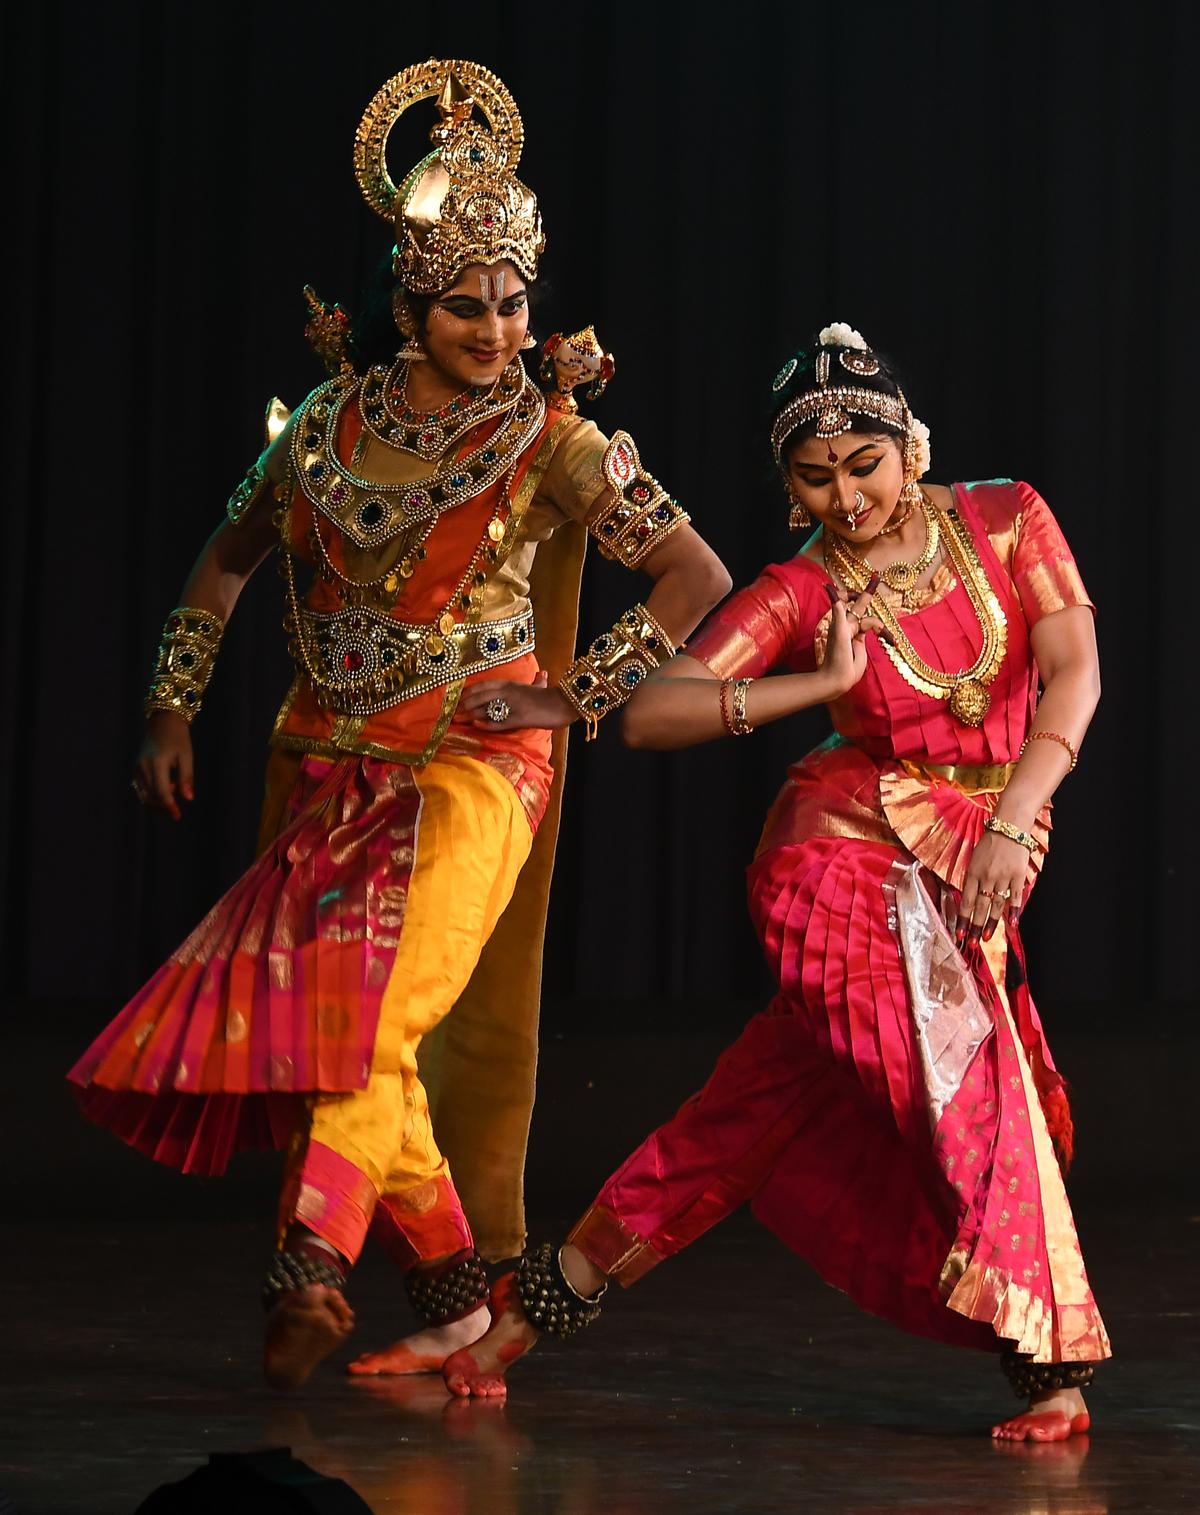 ‘Praise of the Seven Hills’, a dance drama by the students of Anitha Guha.